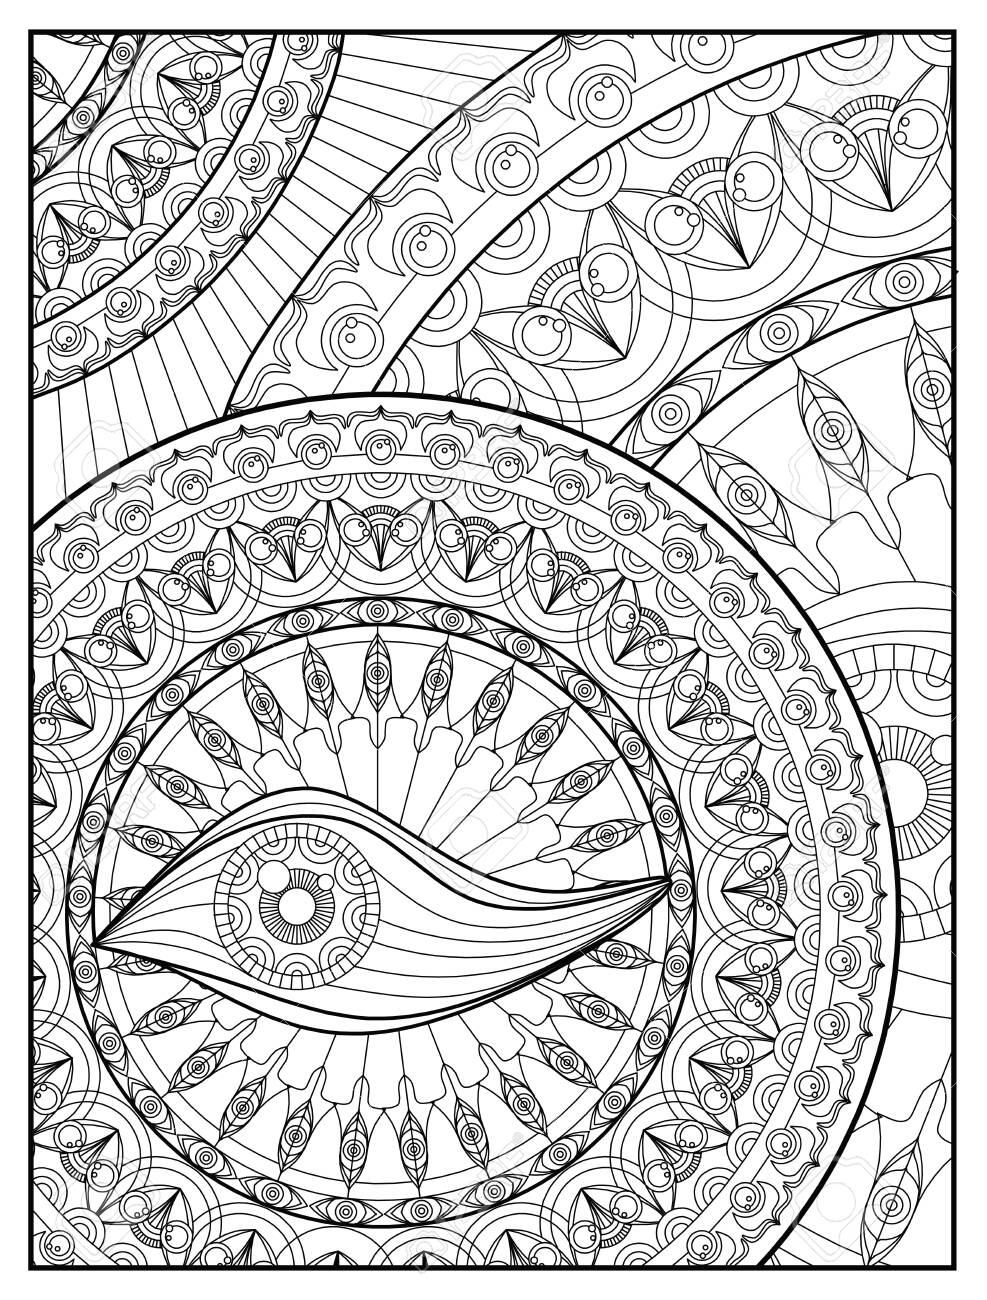 Coloring Pages : Mandala Coloring Page For Adult Relaxation Design